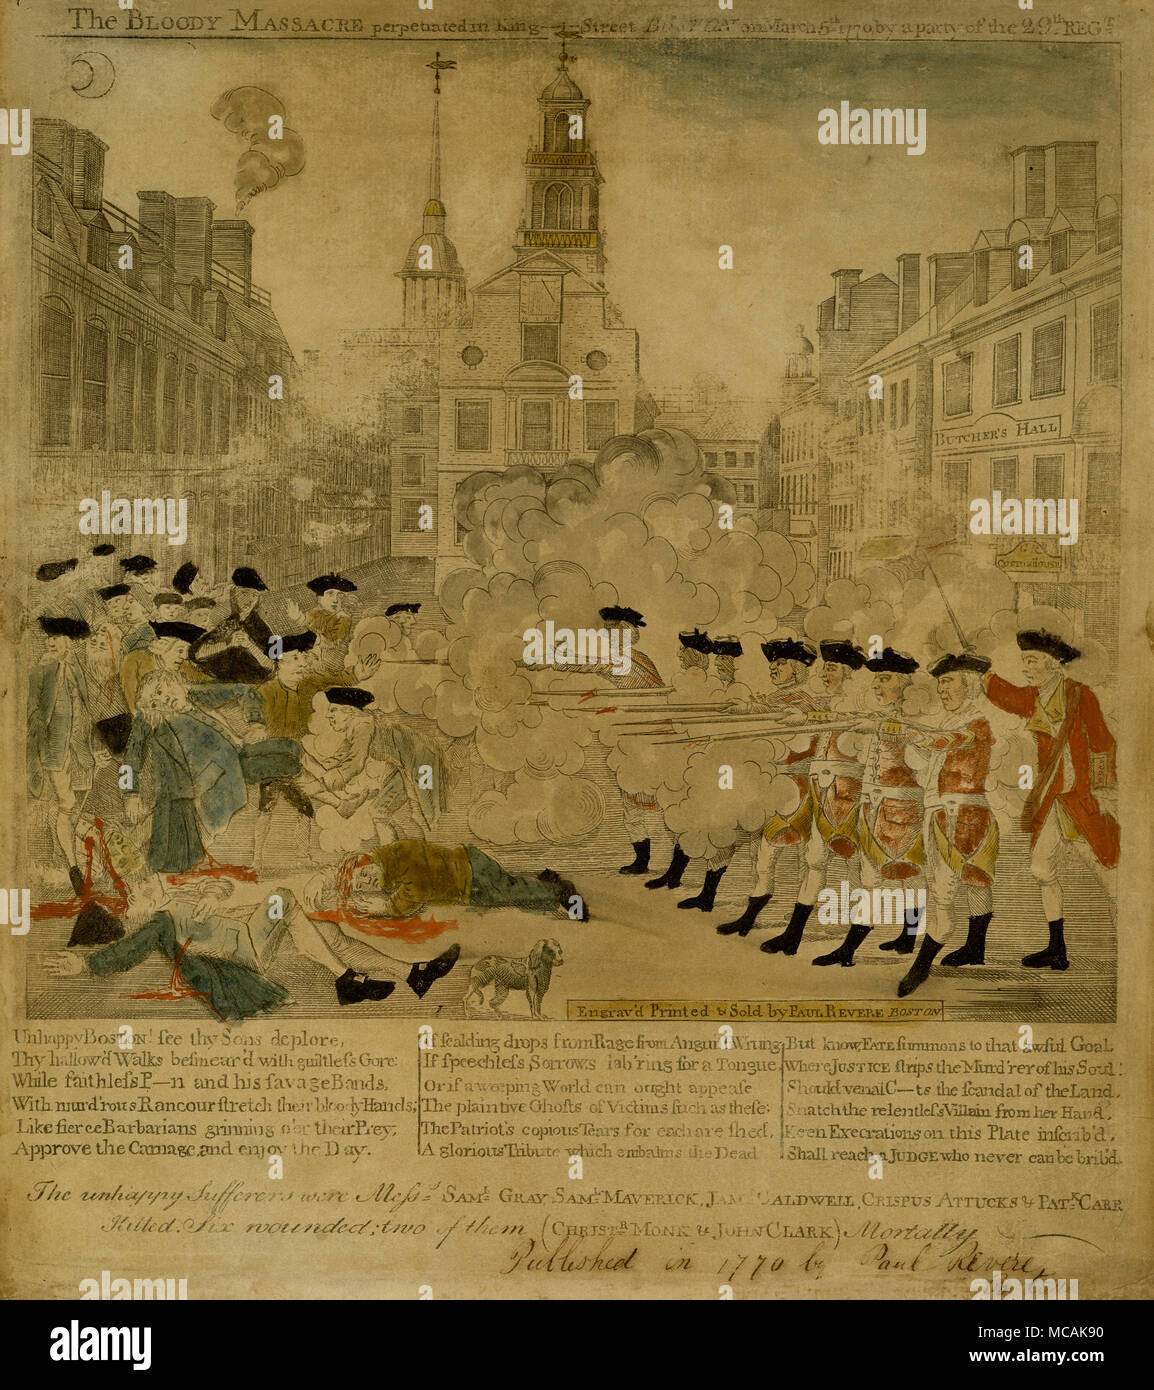 The Boston Massacre, between British soldiers and citizens of Boston on March 5, 1770. On the right a group of seven uniformed soldiers, on the signal of an officer, fire into a crowd of civilians at left. Three of the latter lie bleeding on the ground. Two other casualties have been lifted by the crowd. In the foreground is a dog; in the background are a row of houses, the First Church, and the Town House. Behind the British troops is another row of buildings including the Royal Custom House, which bears the sign (perhaps a sardonic comment) Butcher's Hall. Stock Photo